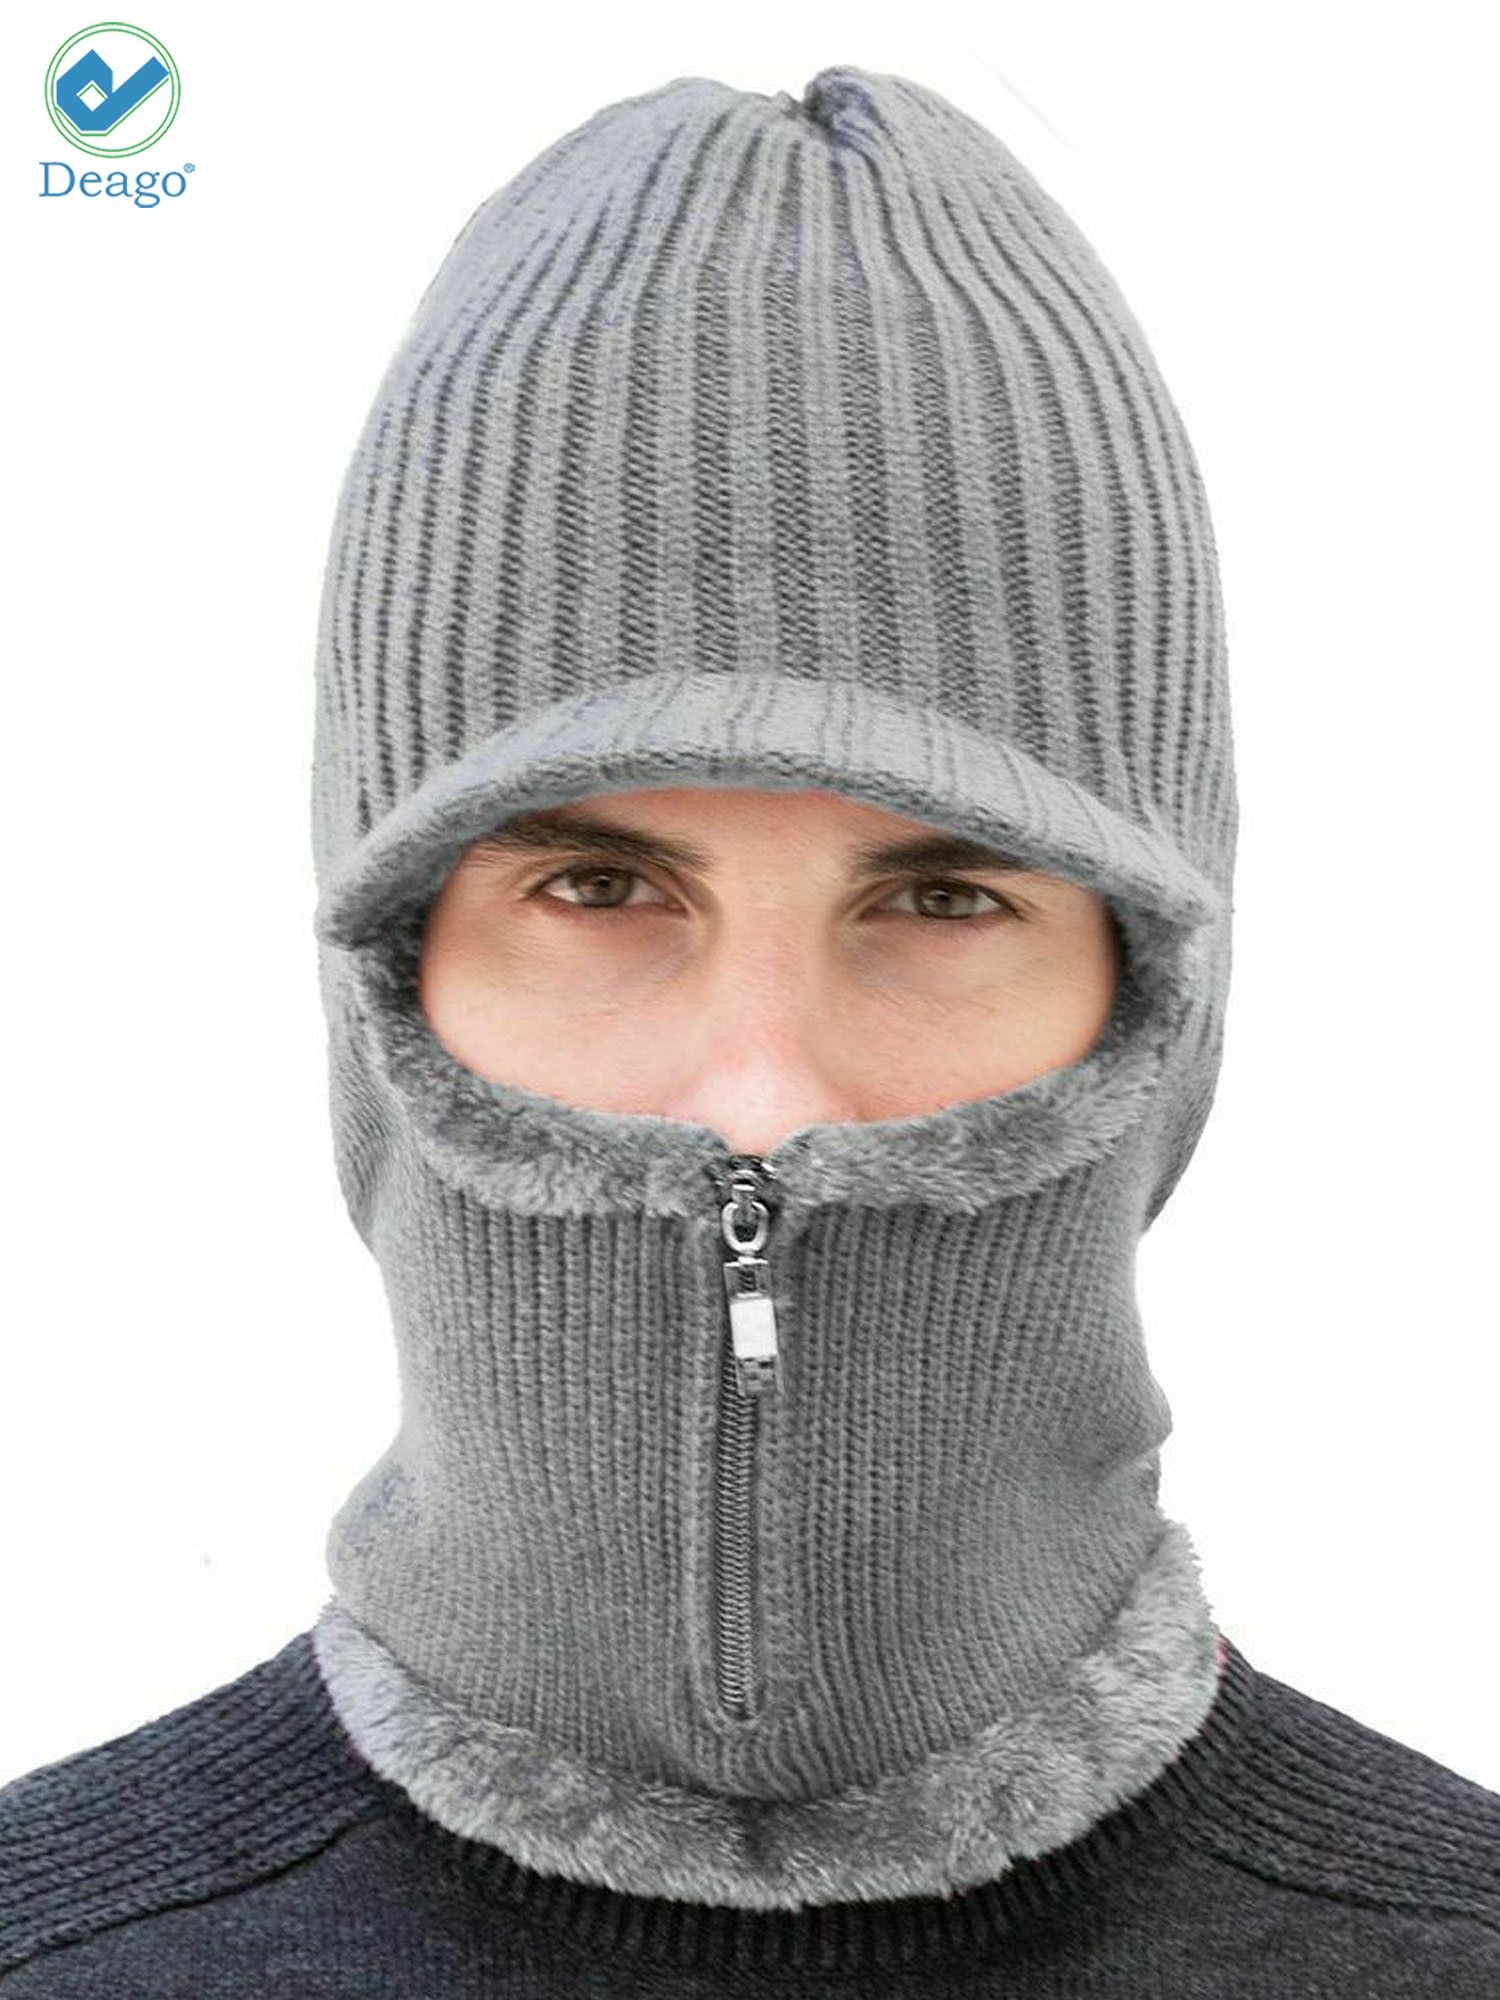 Deago Men Winter Knitted Balaclava Beanie Hat Scarf Set Warm Cycling Ski Mask Neck Warmer with Thick Fleece Lined Zipper Winter Hat & Scarf (Gray) - image 2 of 8